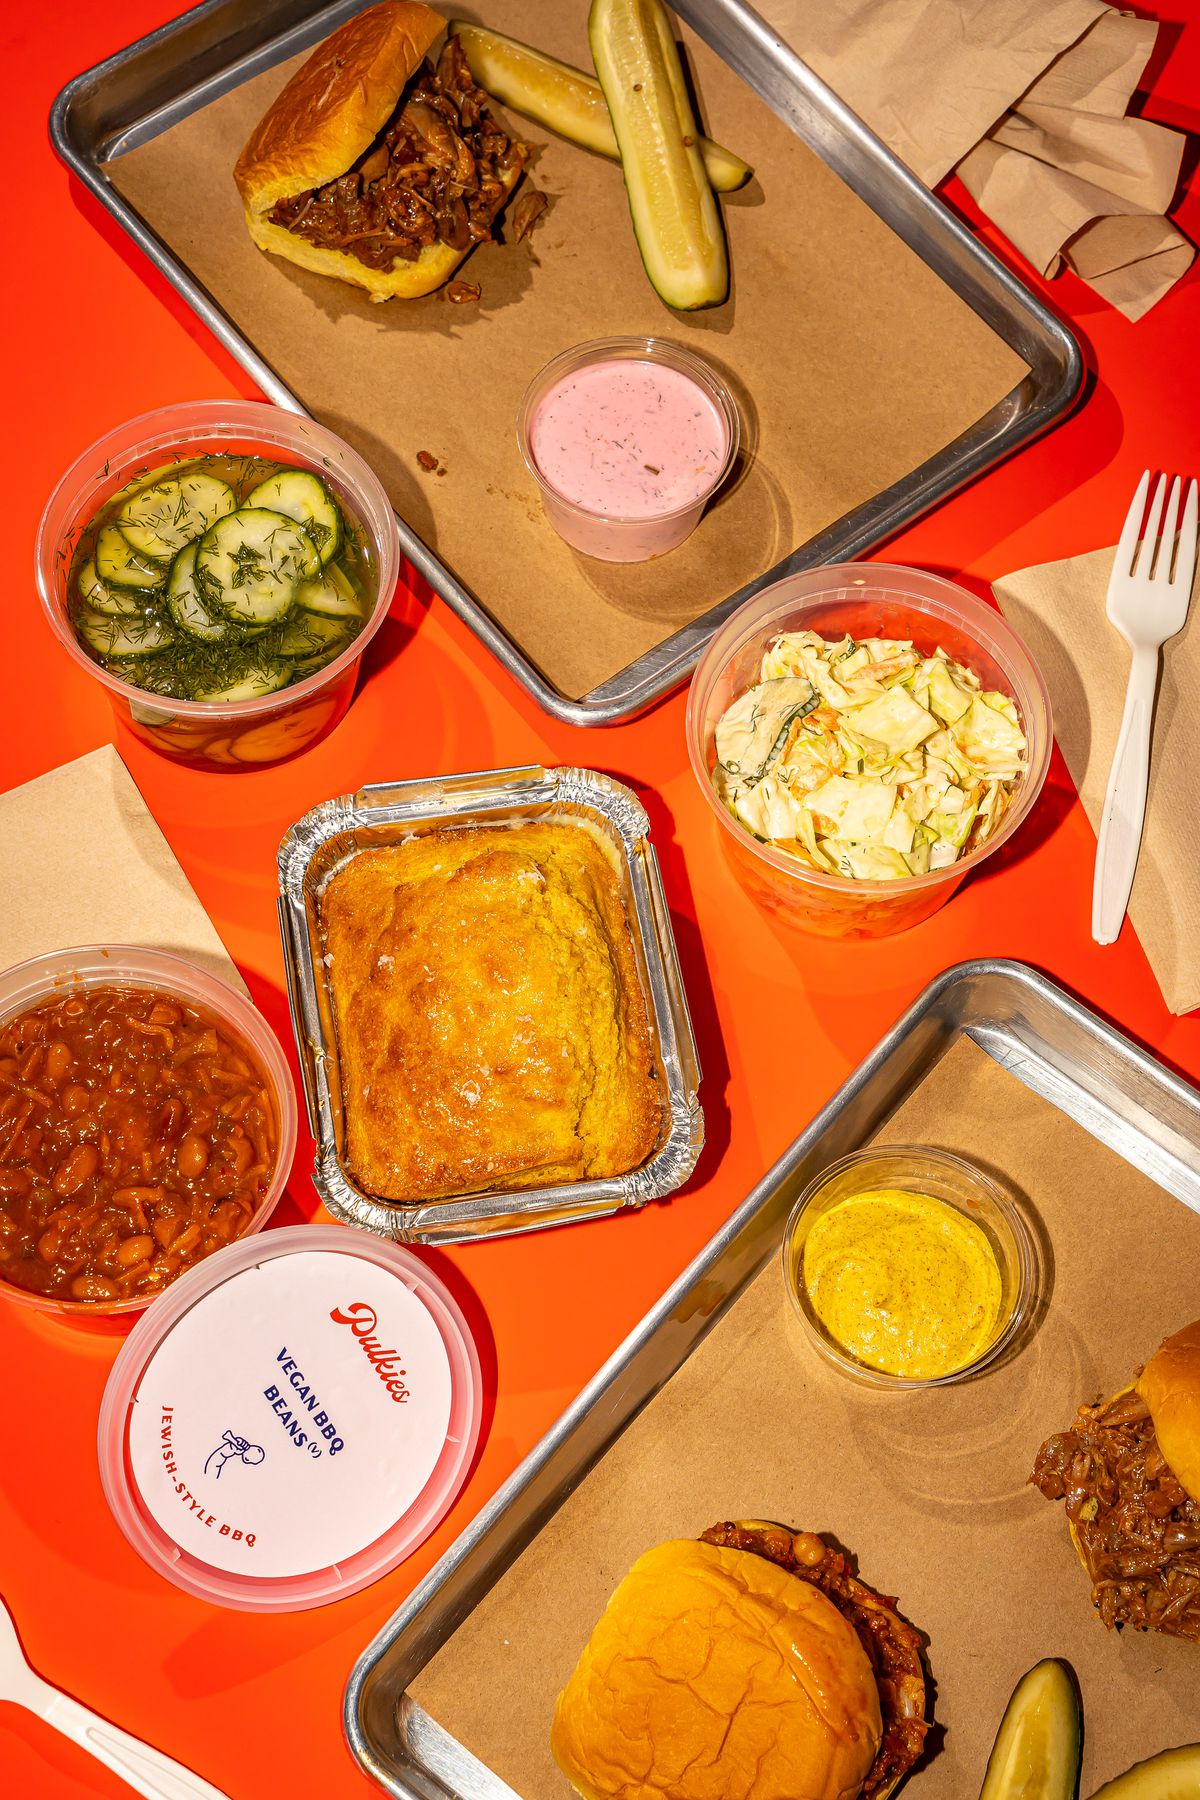 Several open containers of food are placed on an orange sheet including sandwiches, pickles, and salad